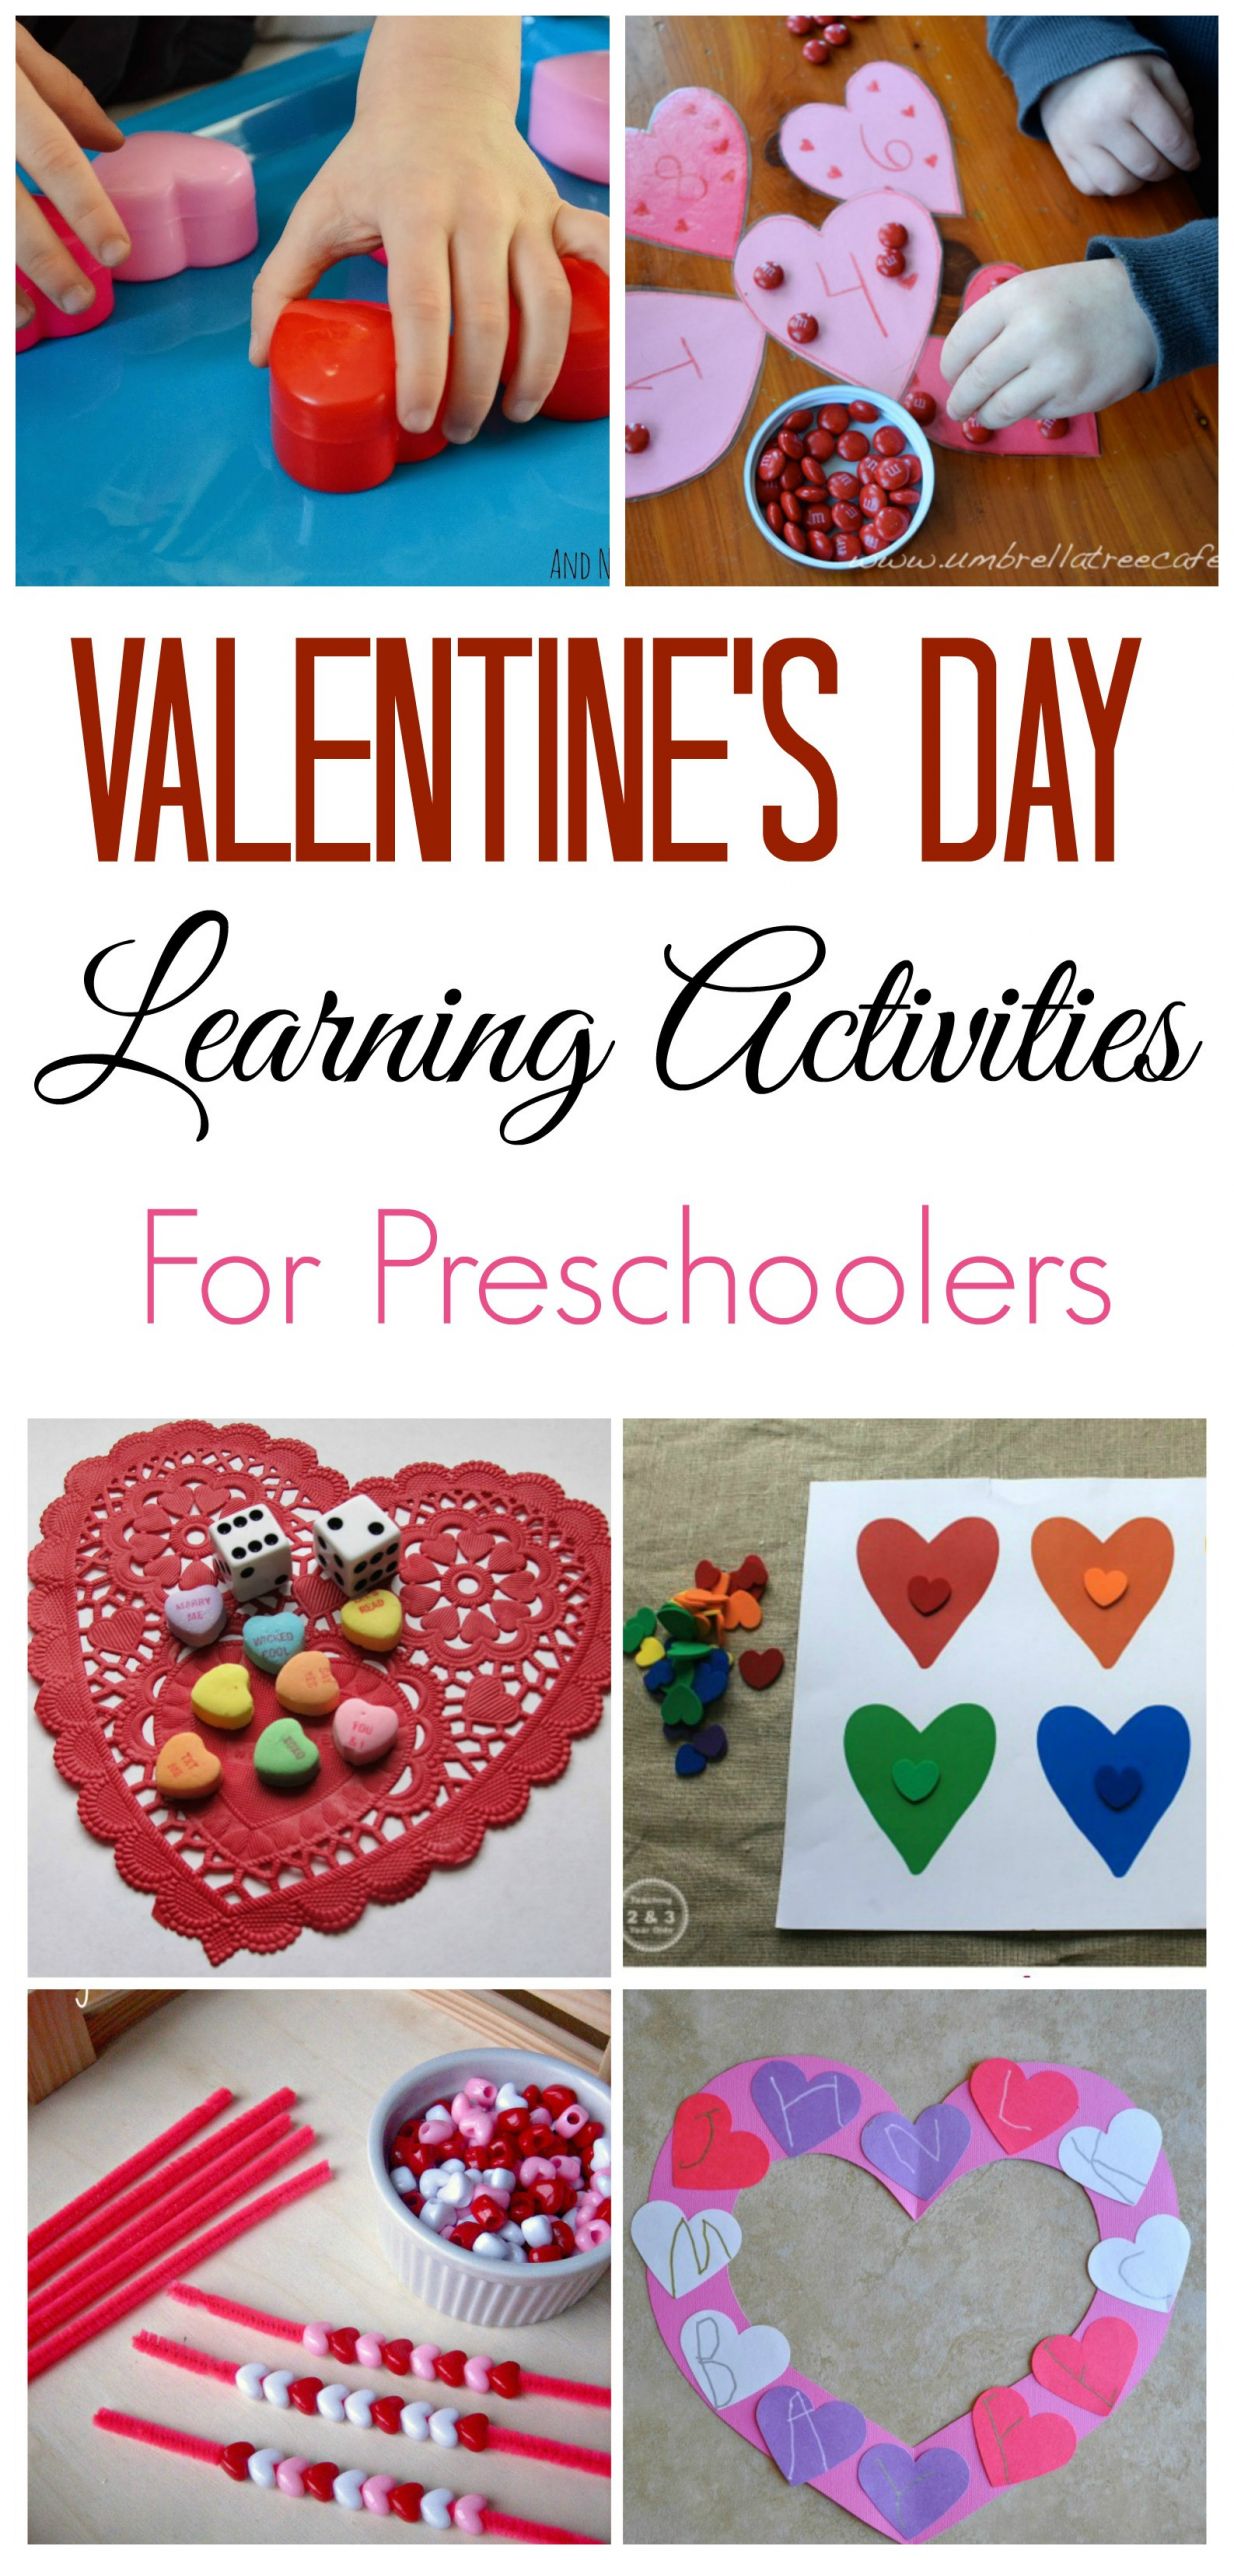 Valentines Day Activities Awesome Valentine S Day Learning Activities for Preschoolers